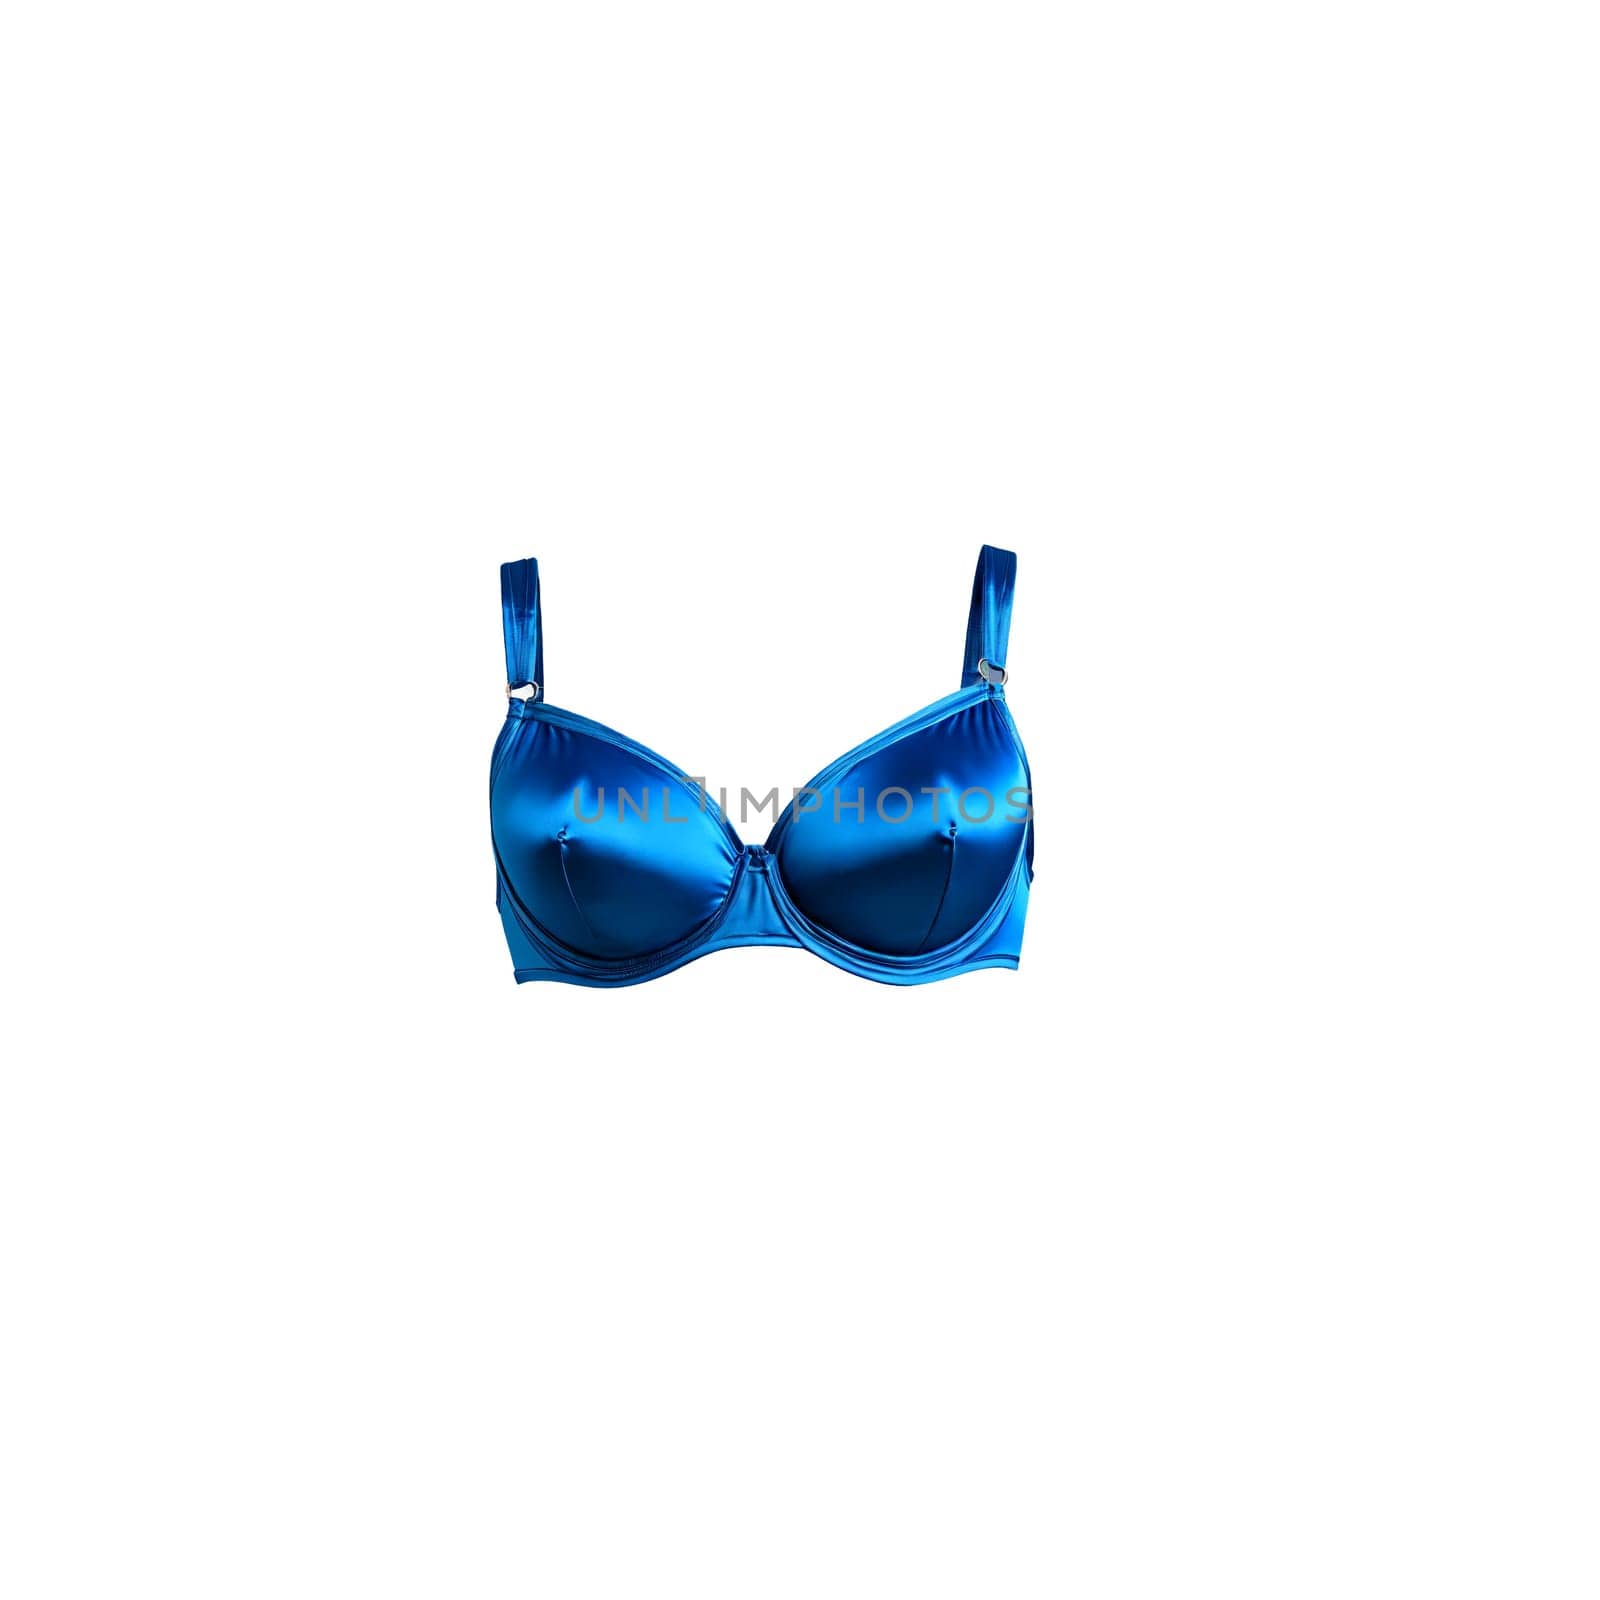 Electric Blue Satin Bra An electric blue satin bra with a bold vibrant color featuring by panophotograph